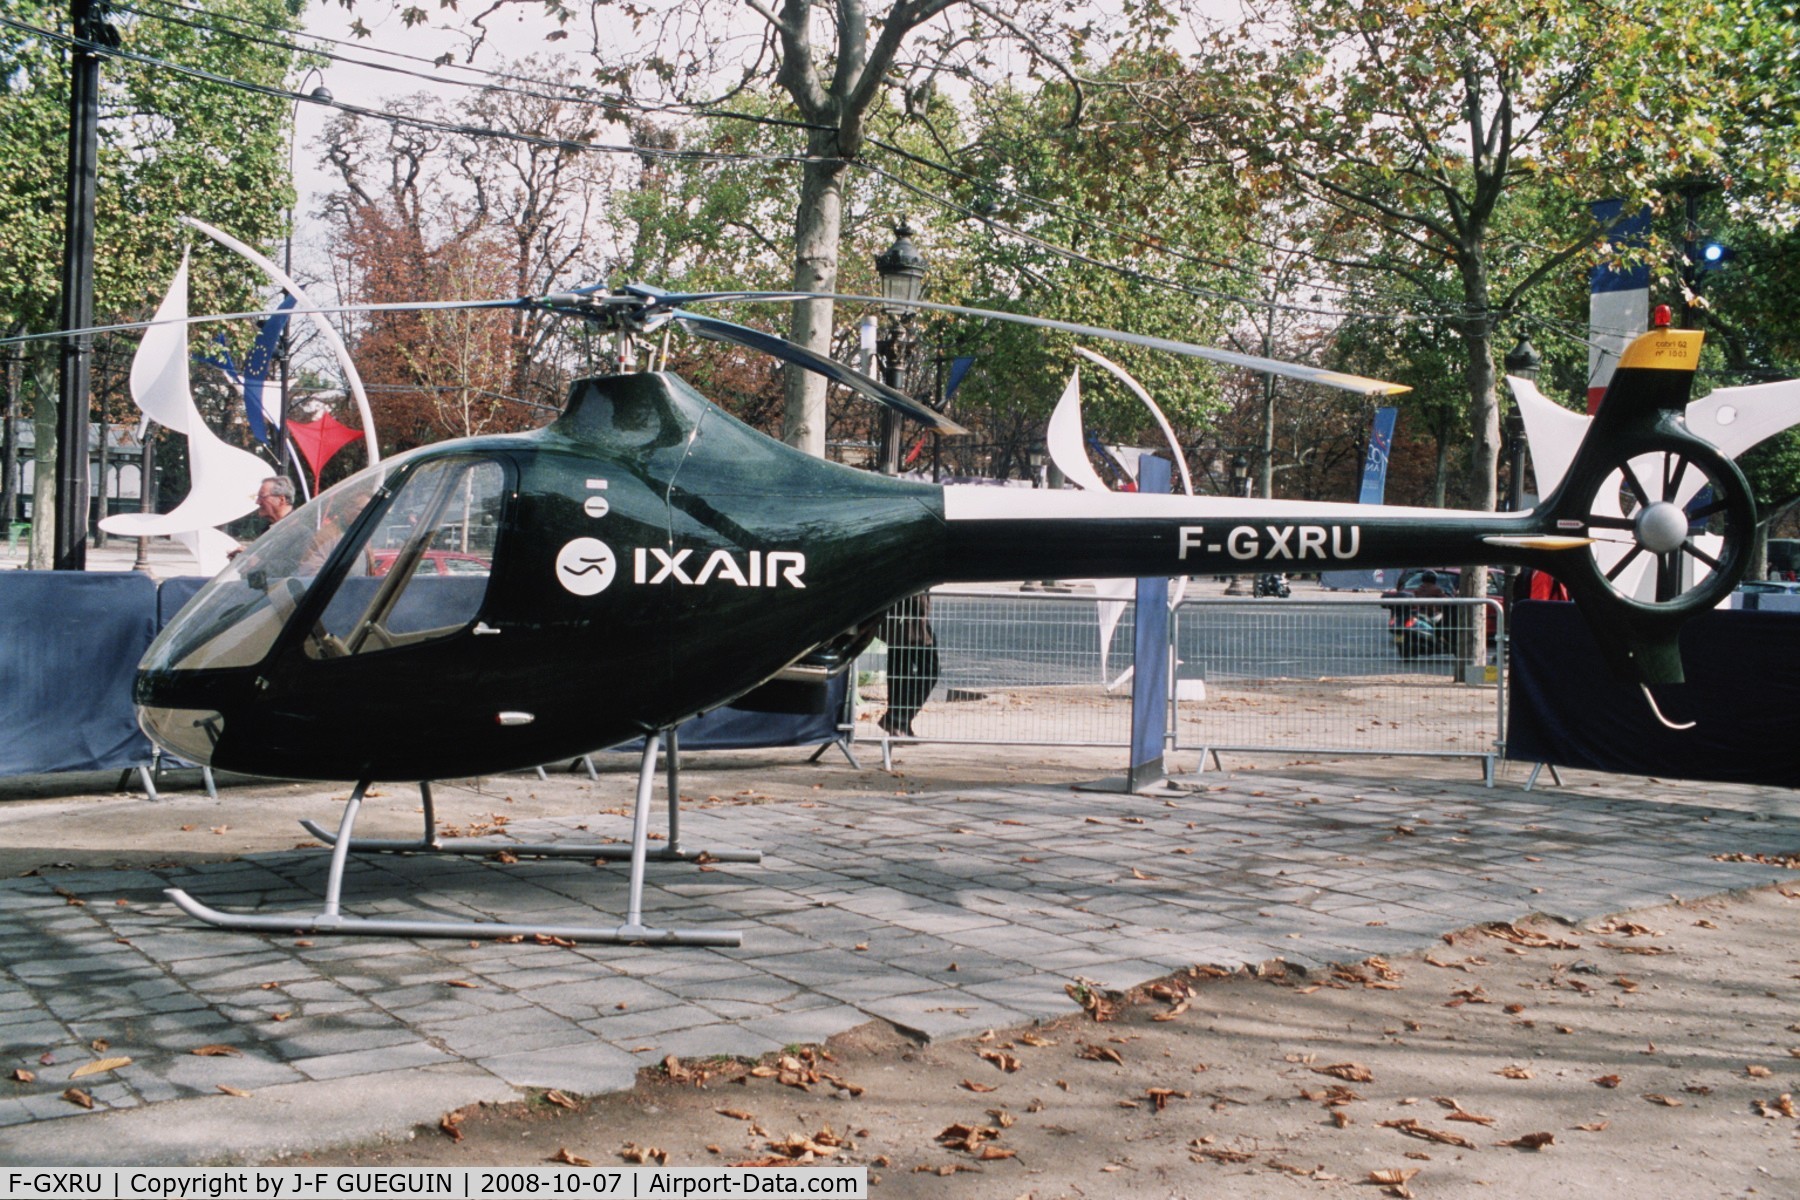 F-GXRU, 2008 Guimbal Cabri G2 C/N 1003, On display at Paris-Champs Elysées for the exhibition 